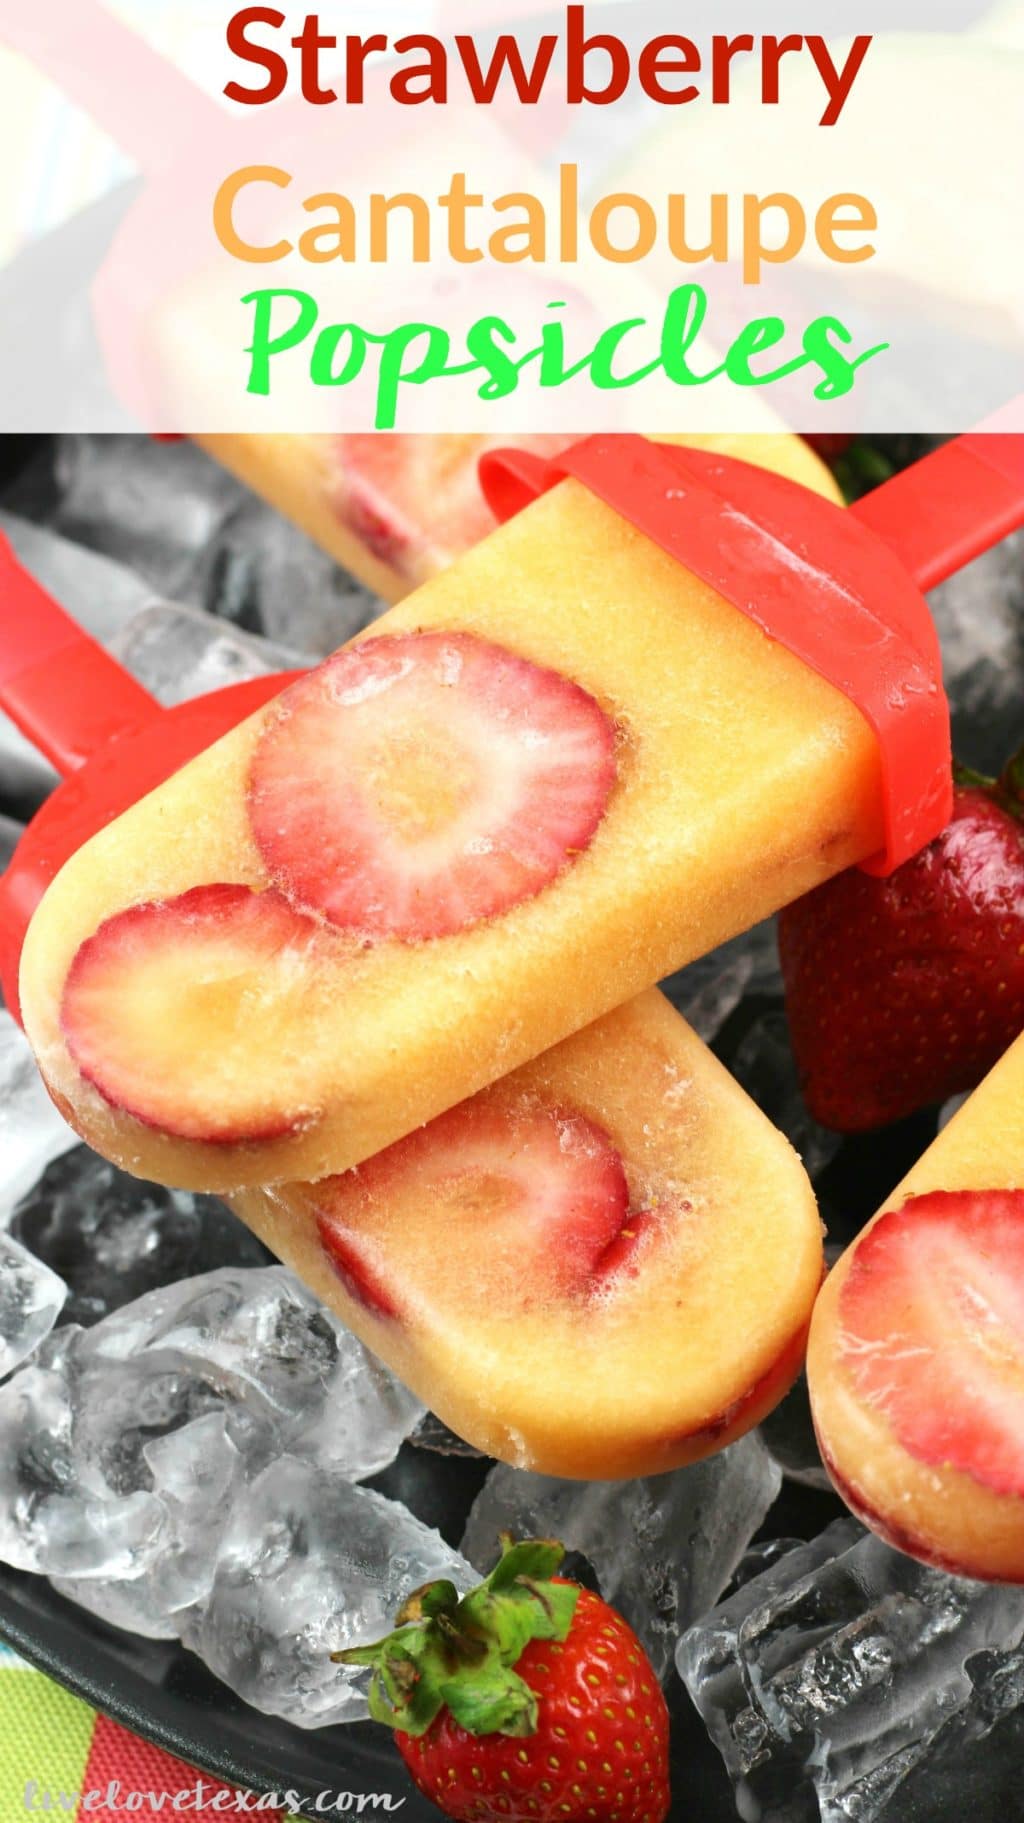 Summer is officially here! To celebrate (and cool off just a bit), try making this easy homemade Strawberry Cantaloupe Popsicles recipe! This is such a great way to allow kids to help in the kitchen and enjoy a healthy snack afterwards!